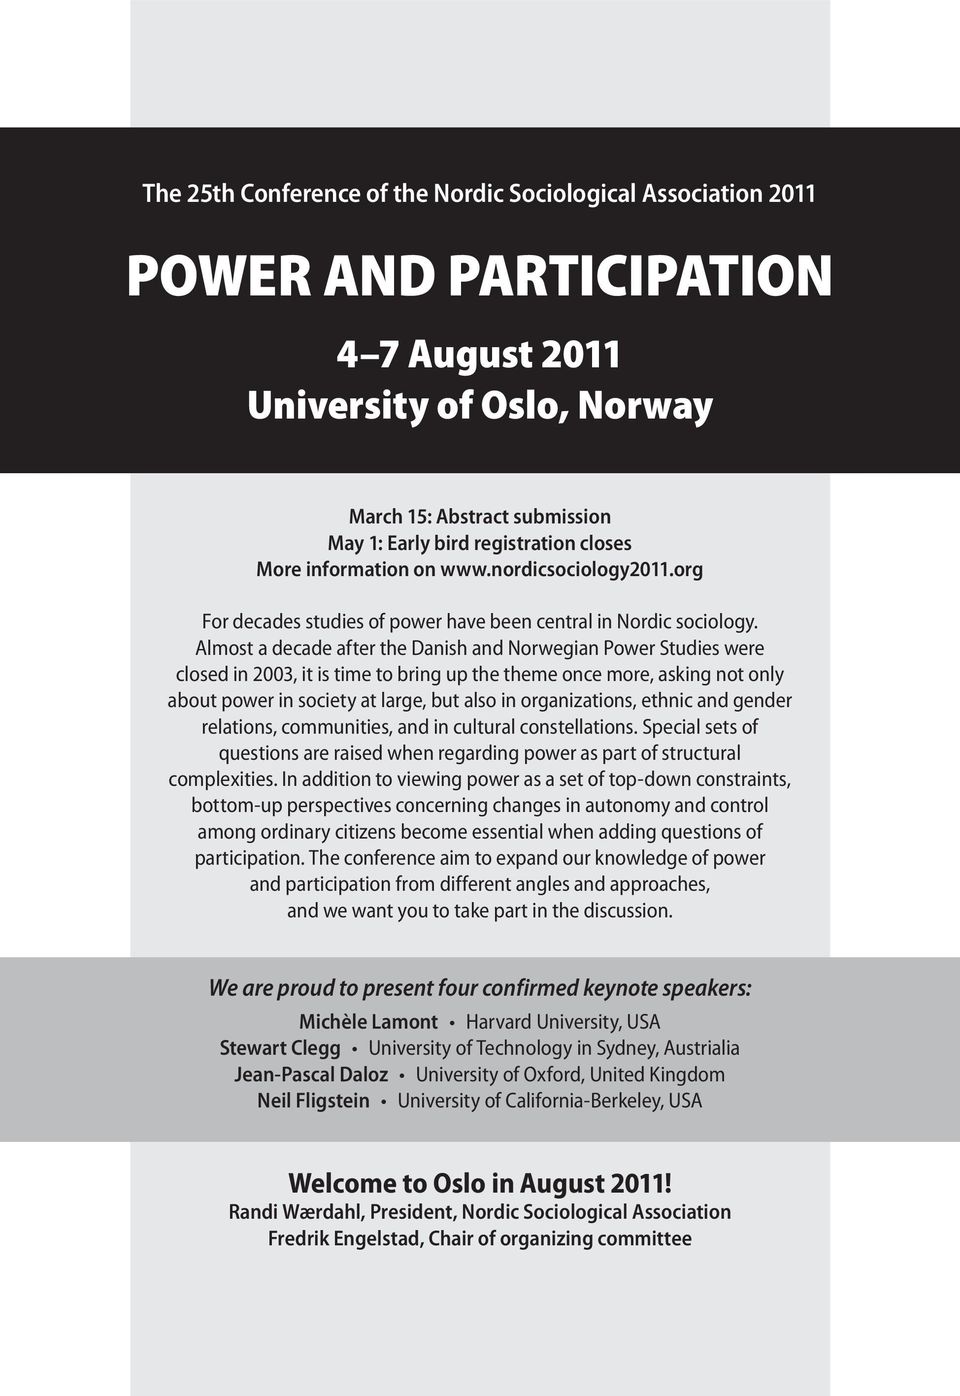 Almost a decade after the Danish and Norwegian Power Studies were closed in 2003, it is time to bring up the theme once more, asking not only about power in society at large, but also in